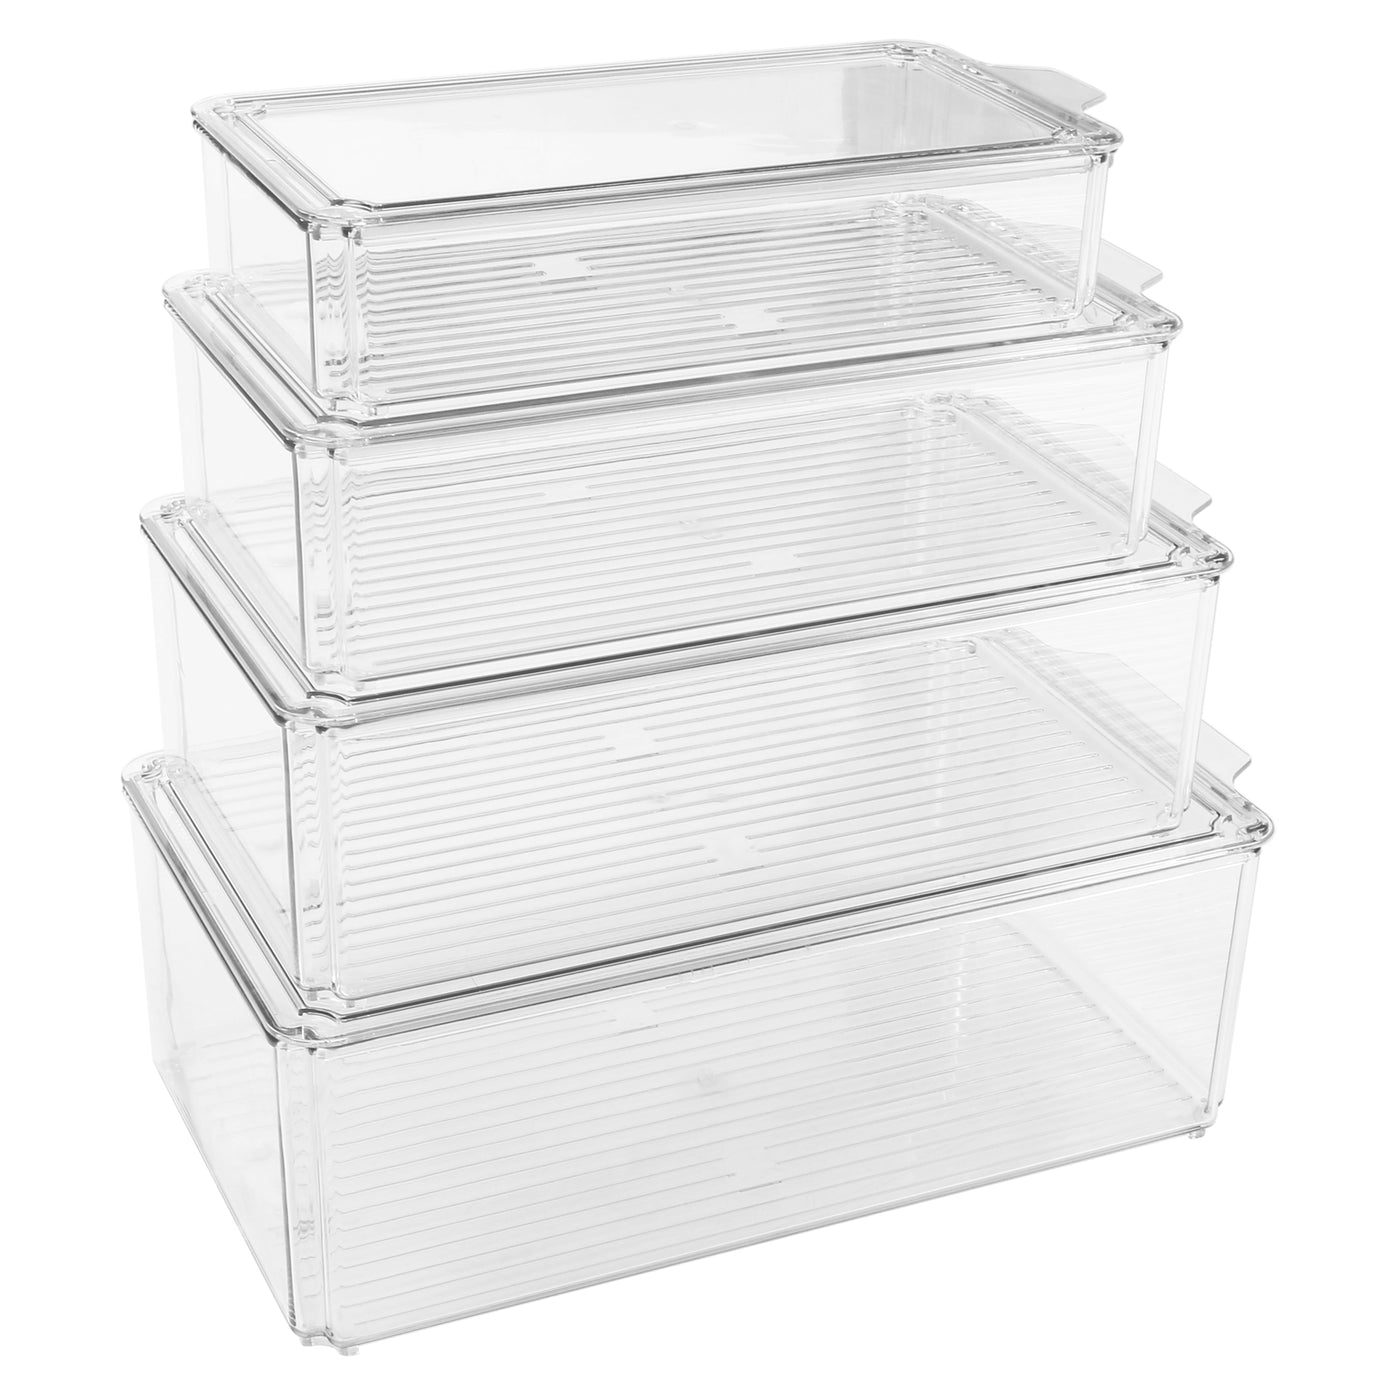 Pack of 4 Refrigerator Organizer Bins with Lids Stackable Food Storage Container